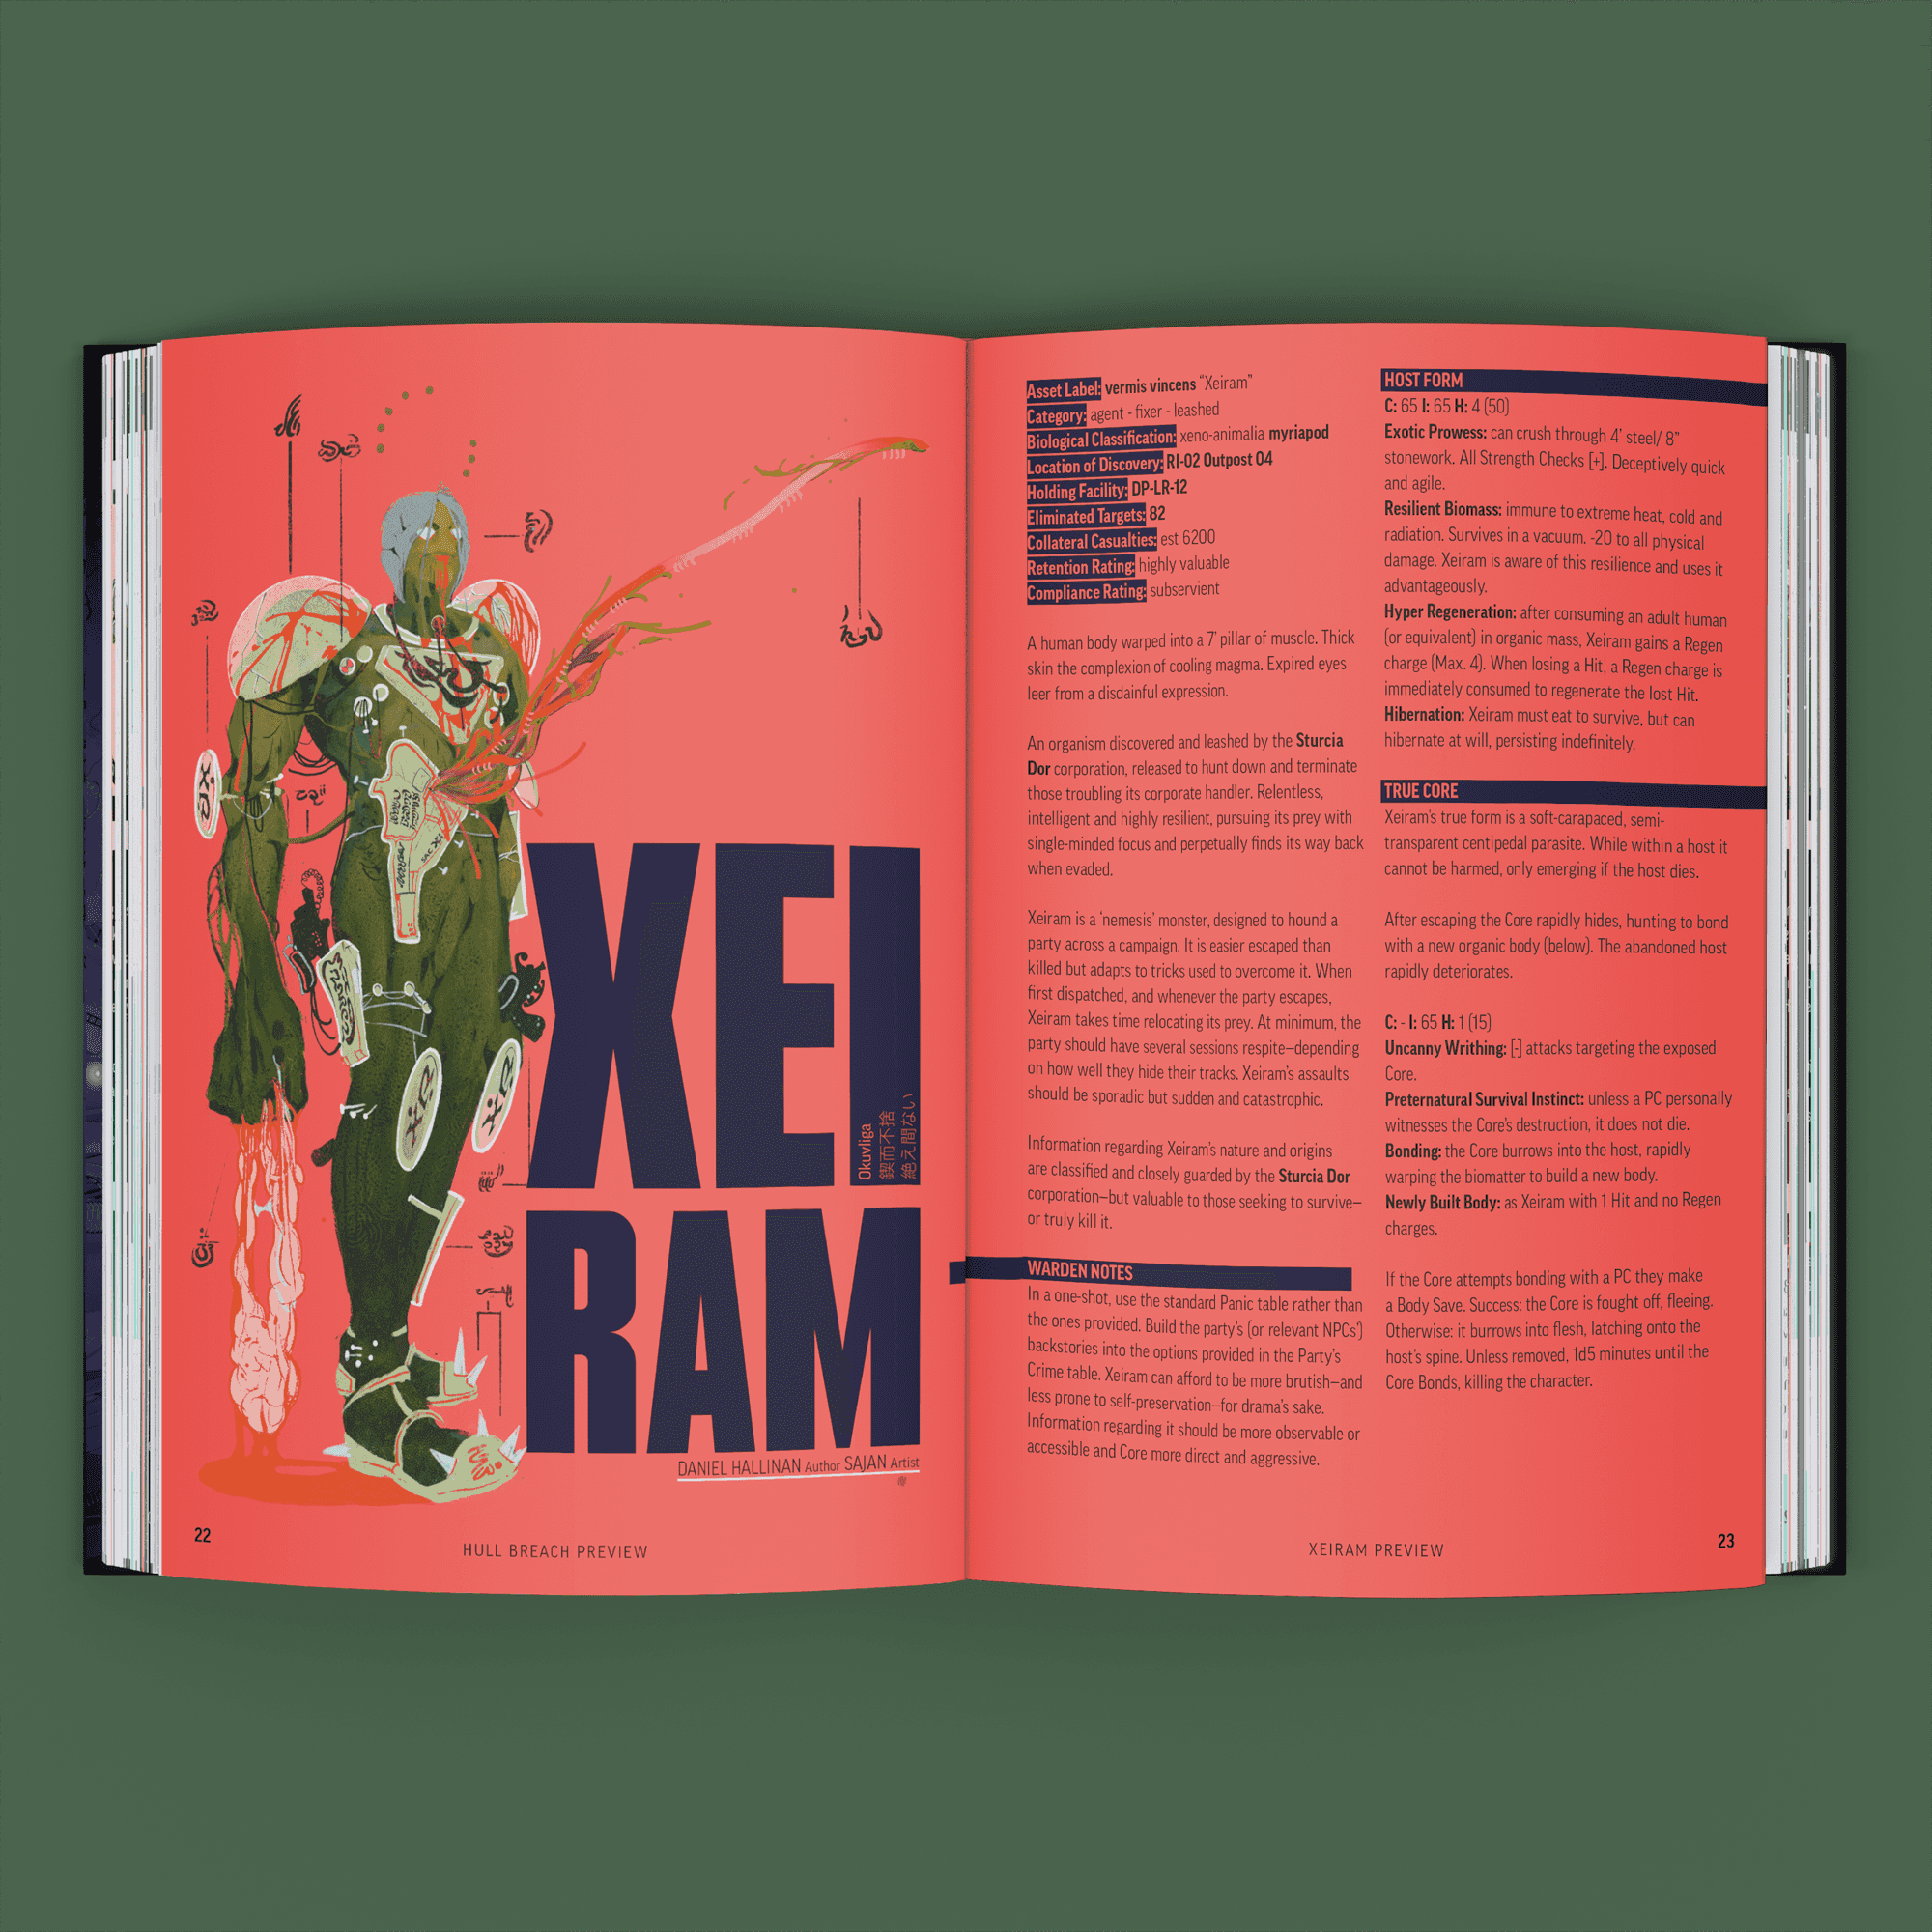 Artist rendering of interior pages of Xeiram article from Hull Breach